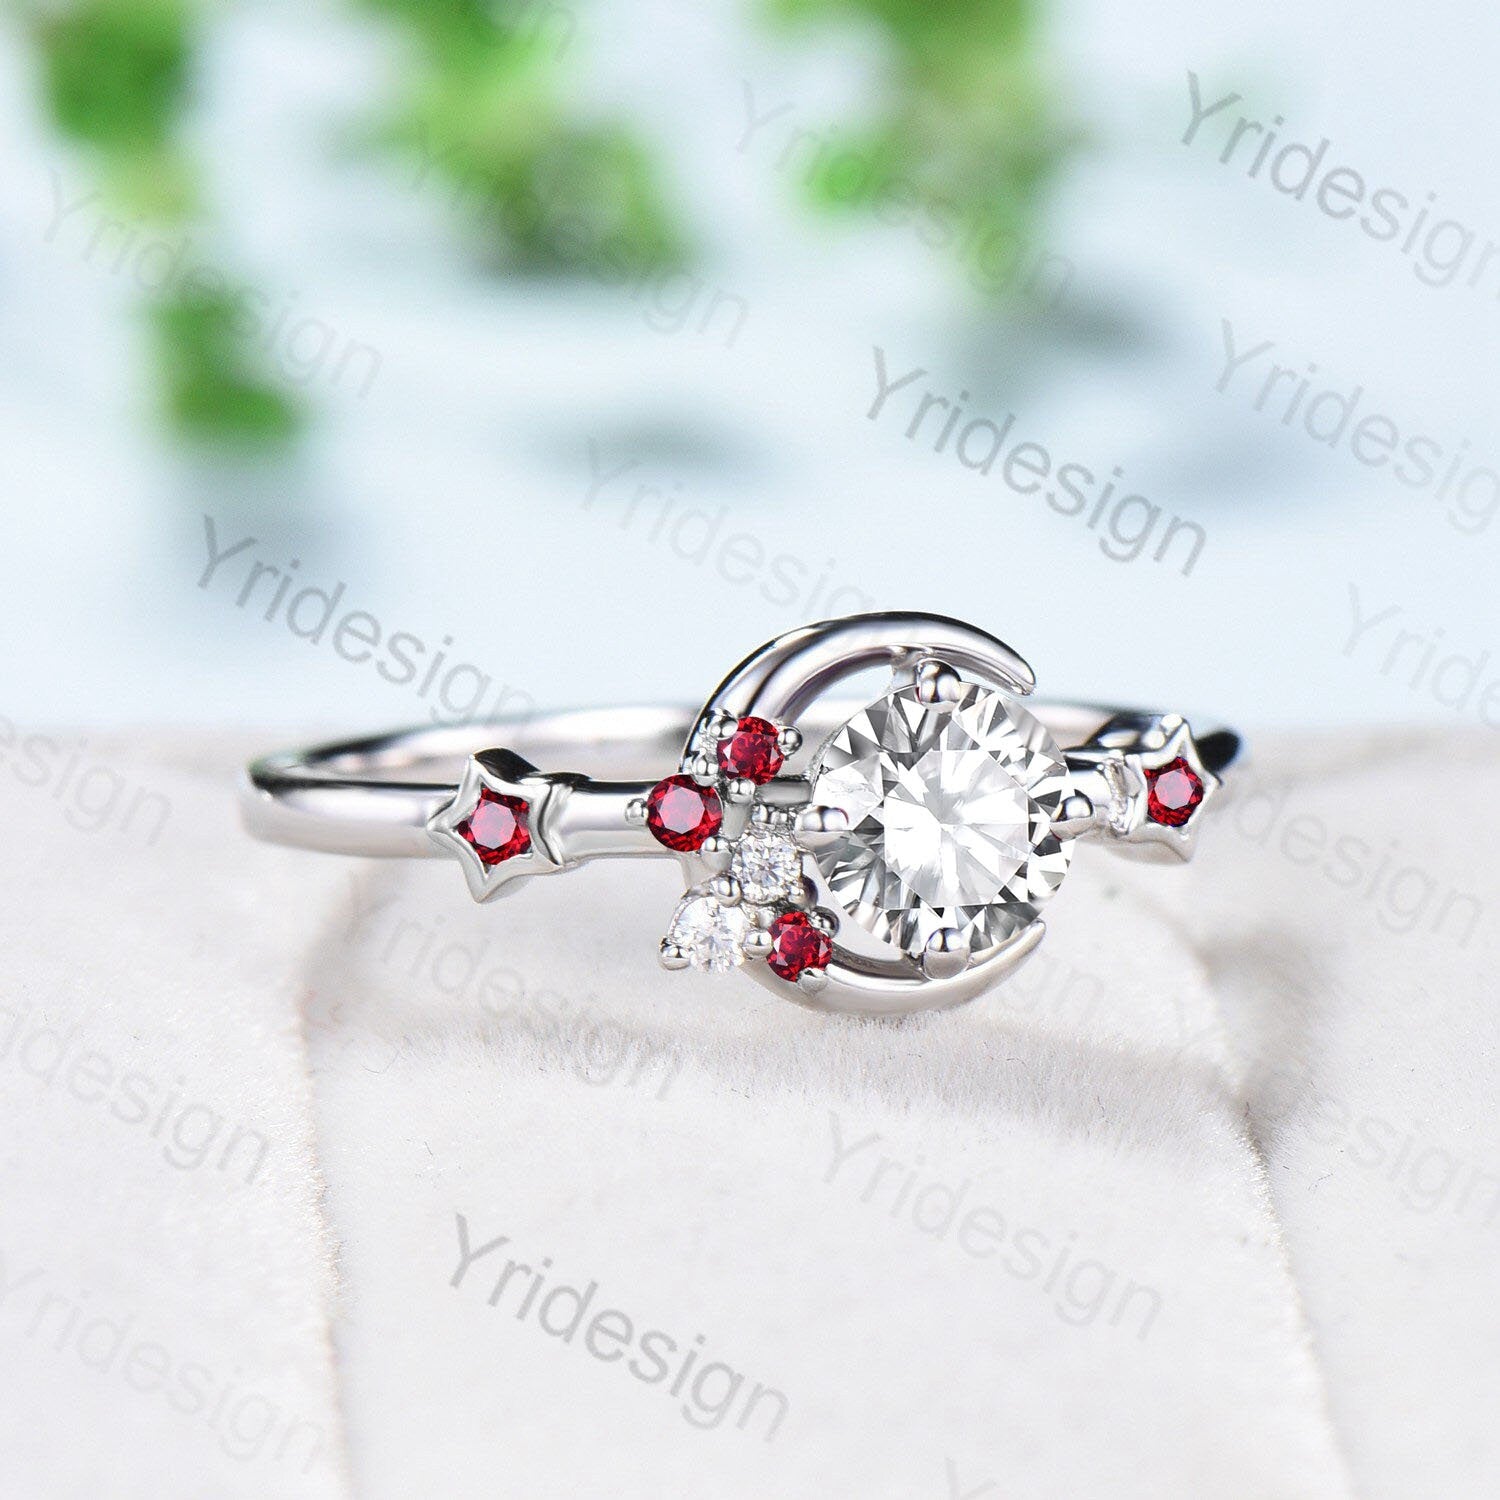 Vintage Crescent moon lab grown diamond ring 18k white gold Unique cluster Star celestial galaxy natural ruby wedding ring IGI Certificate - PENFINE